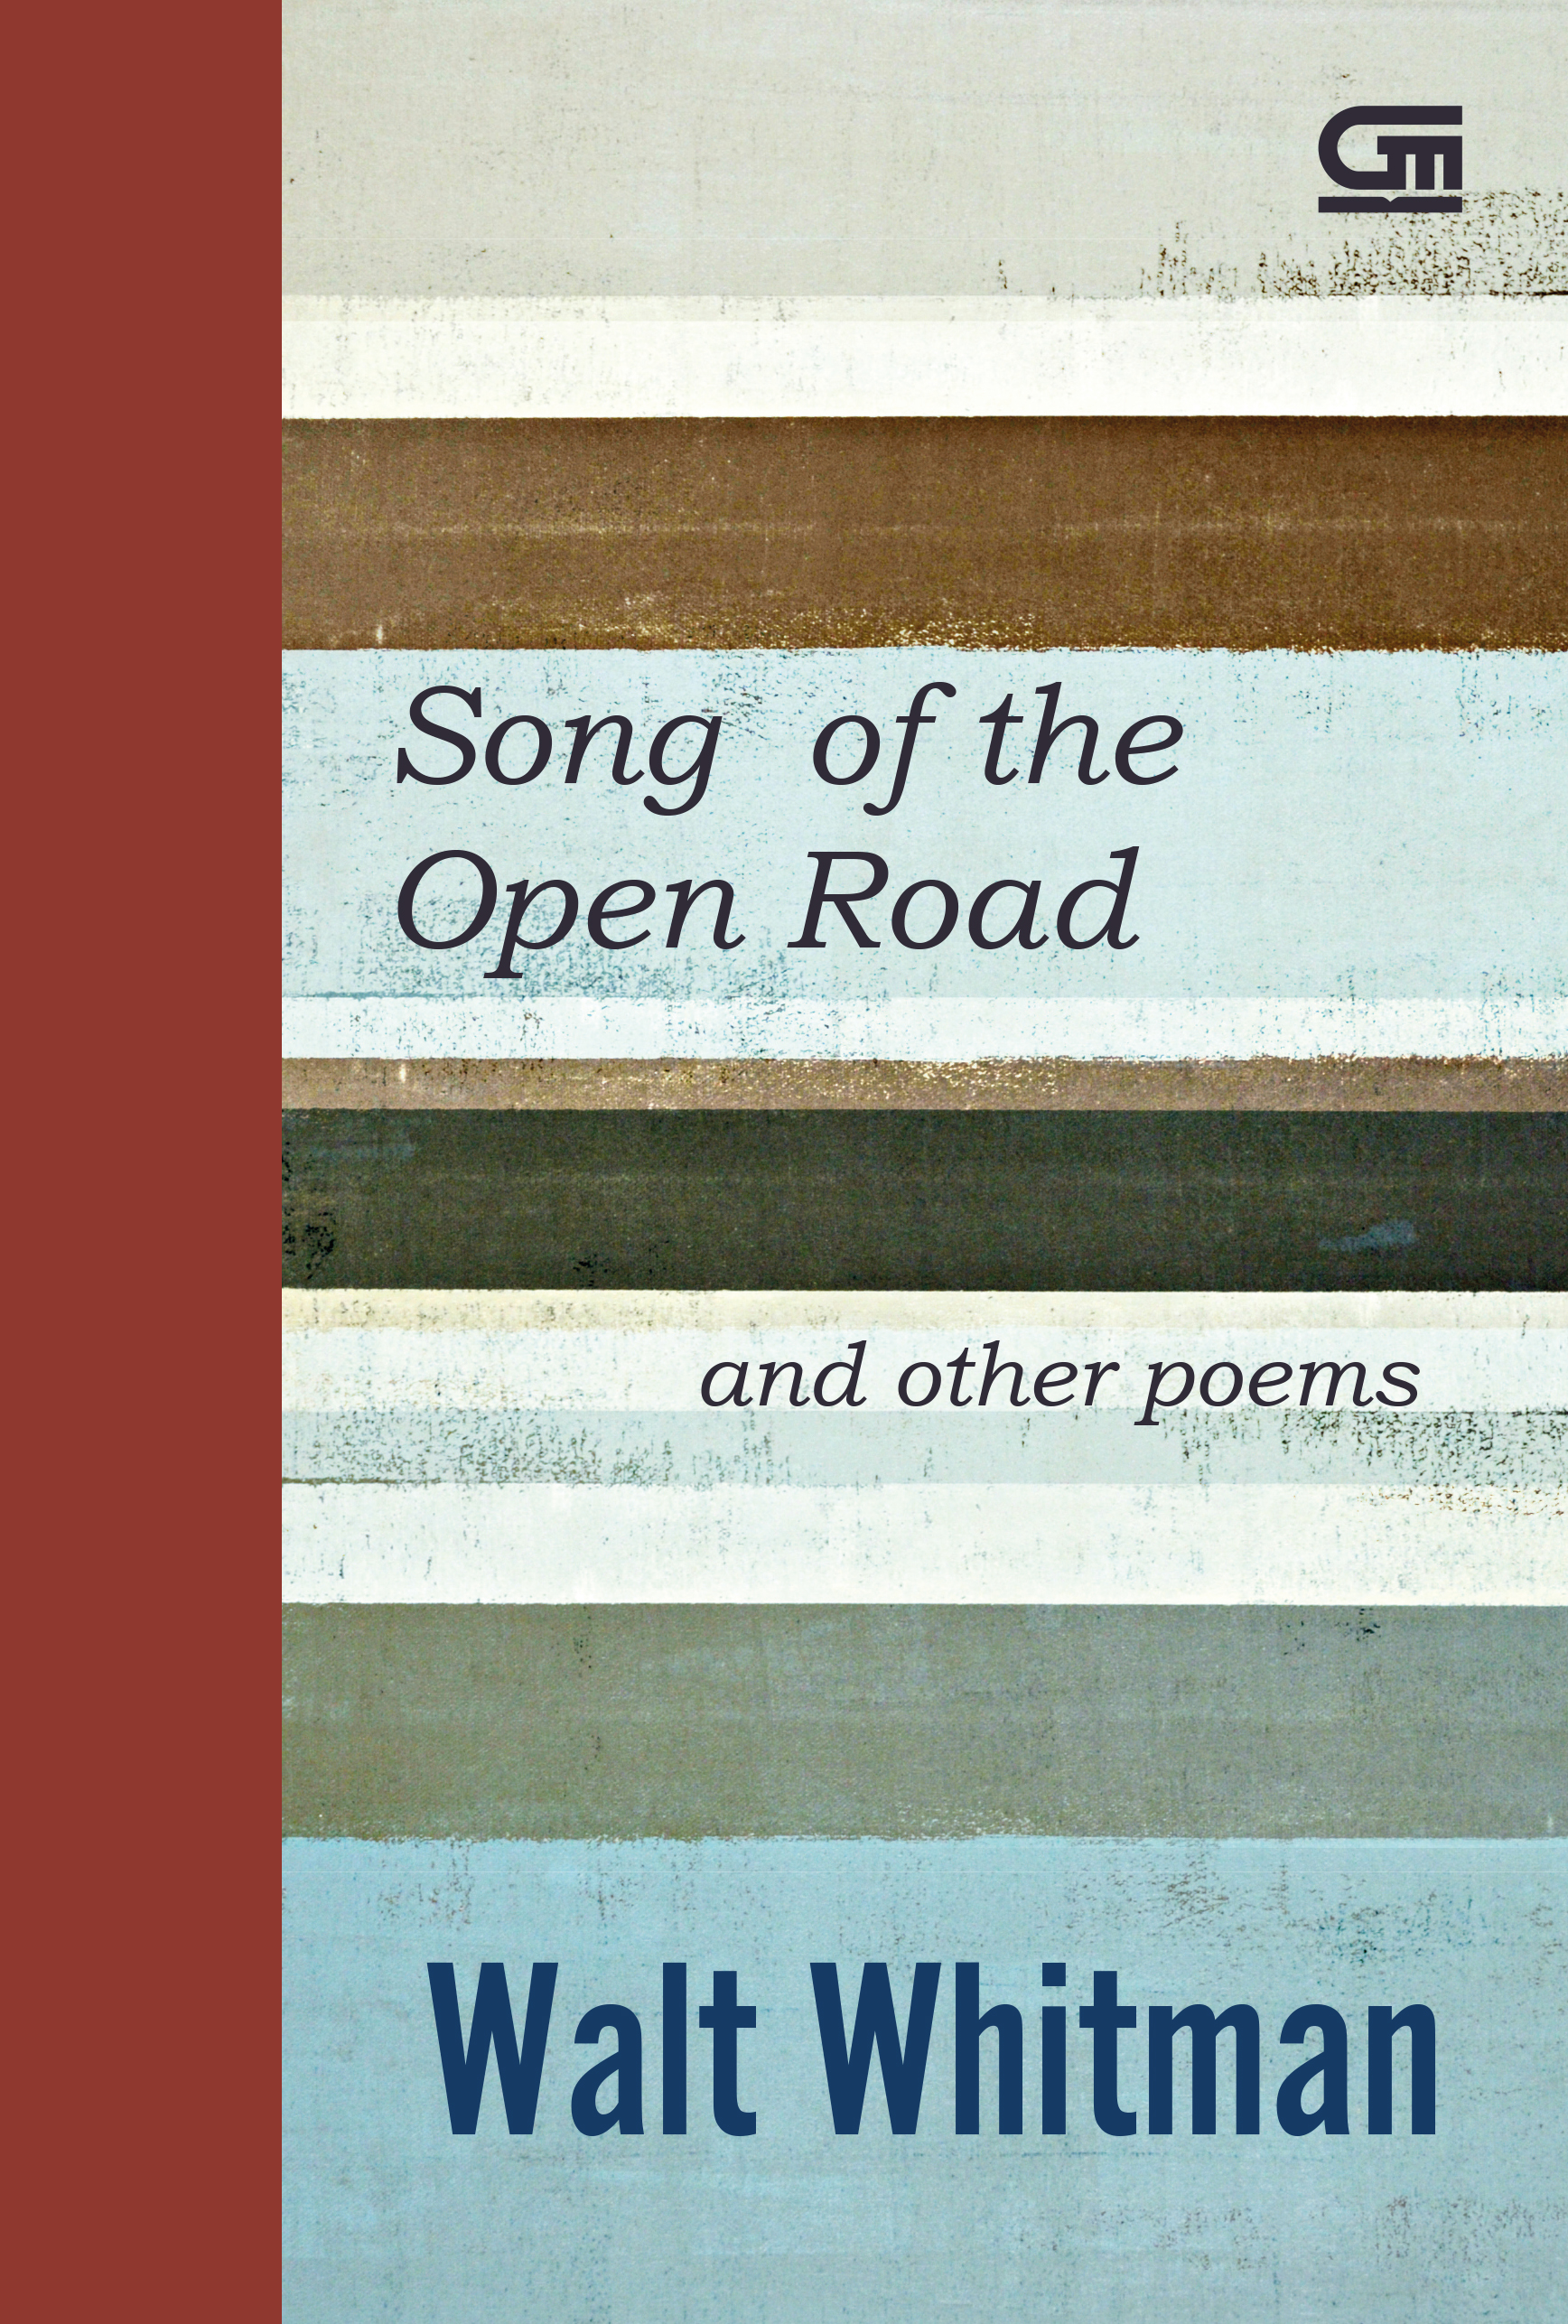 Song of the open road and other poems